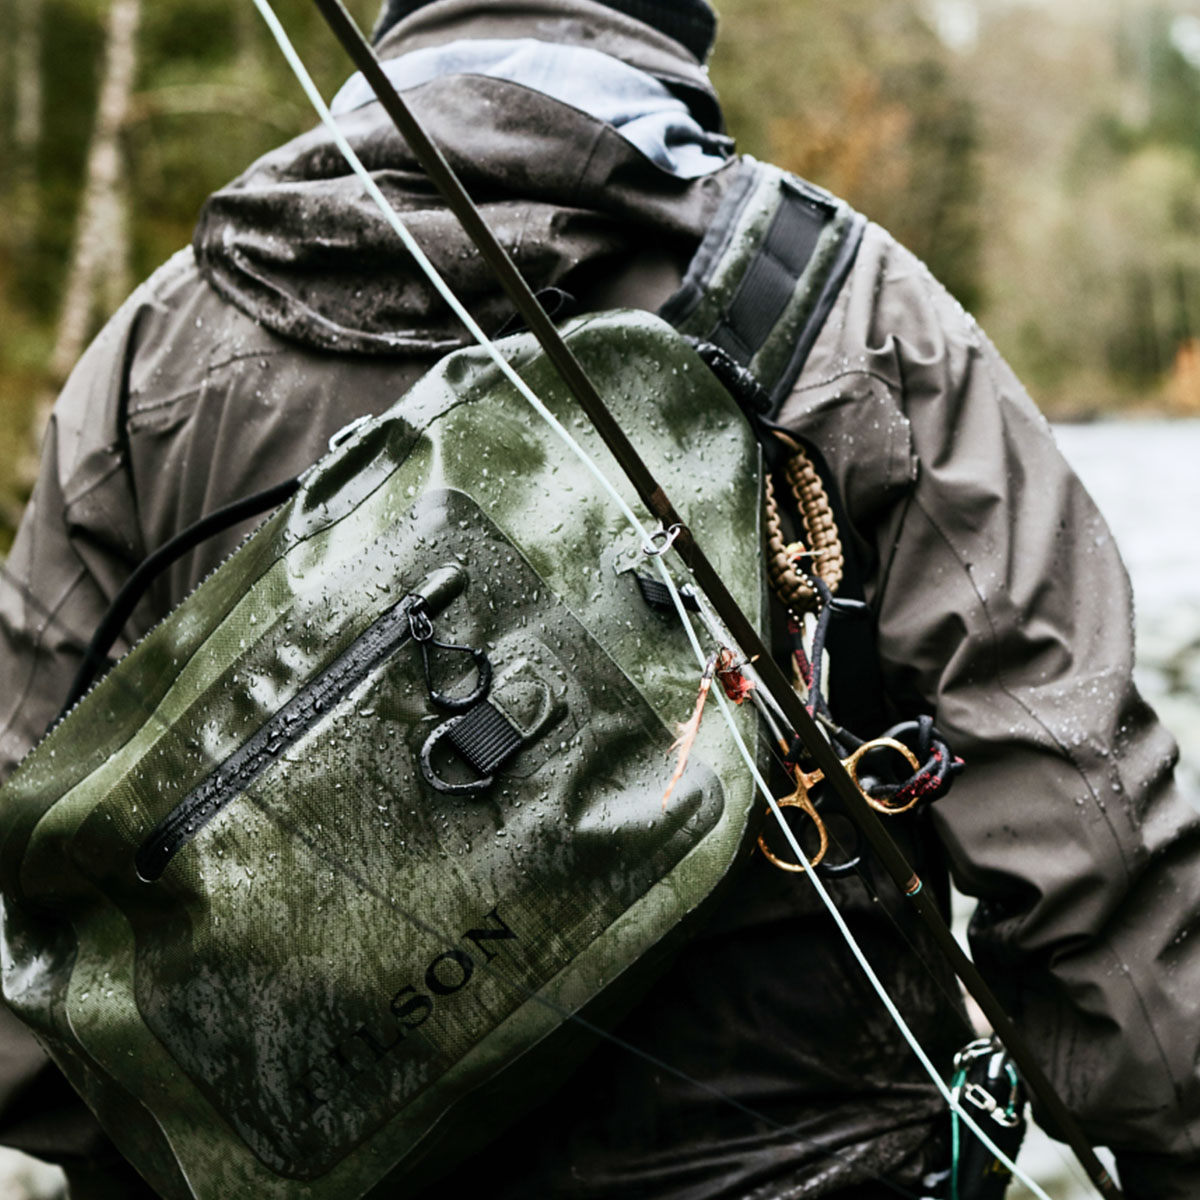 Filson Dry Waist Pack Green, keeps your gear dry in any weather, even when fully submerged